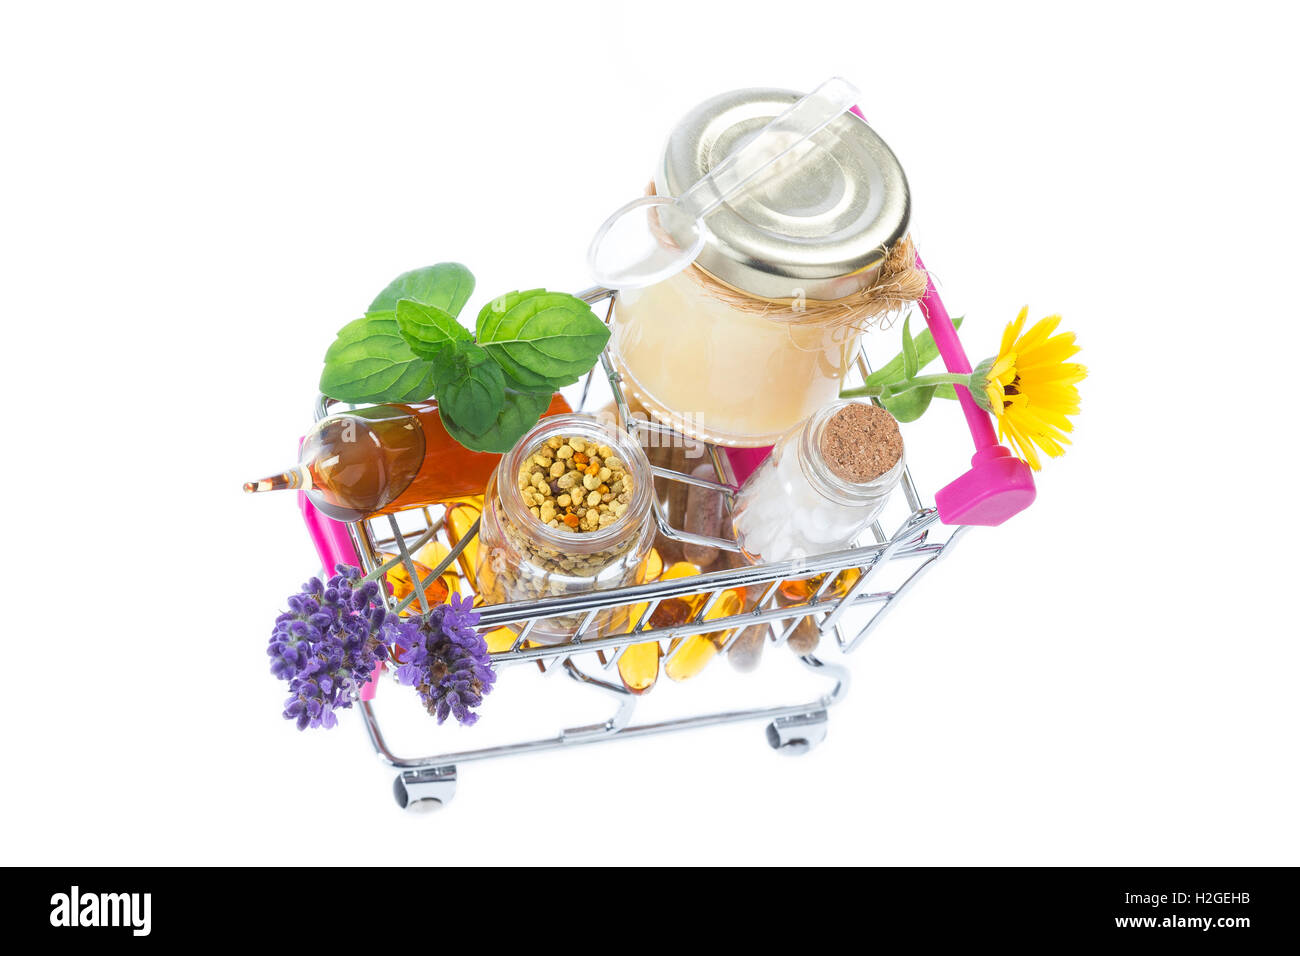 Alternative health care fresh herbal ,honey and wild flower in a supermatket troley Stock Photo